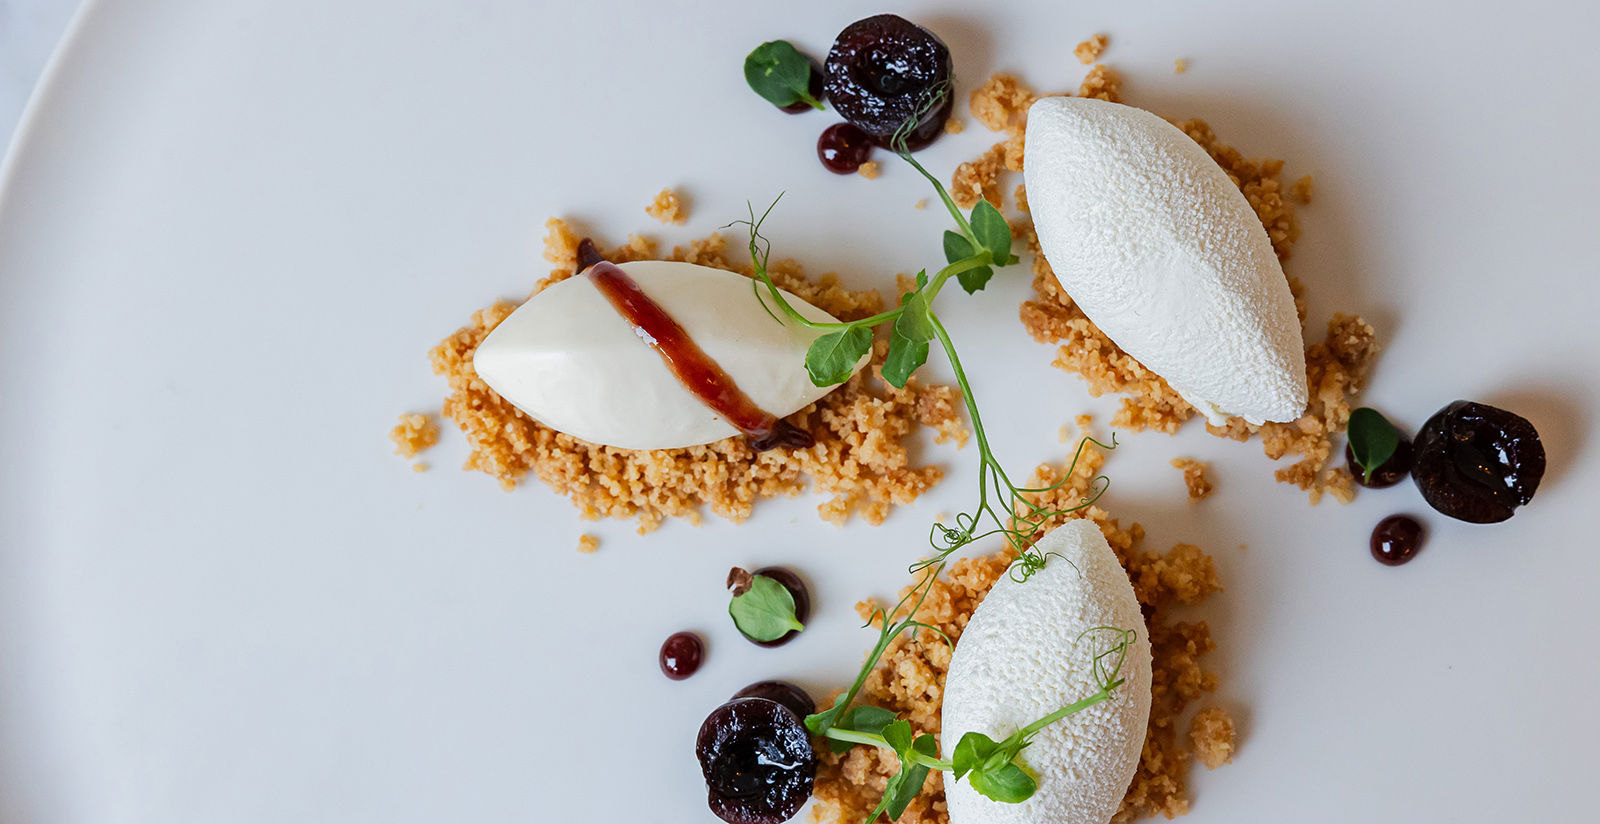 FH55 Hotels - Sweet ricotta mousse, sour cherries and vanilla brittle: chef Mulargia’s Valentine’s Day recipe 1